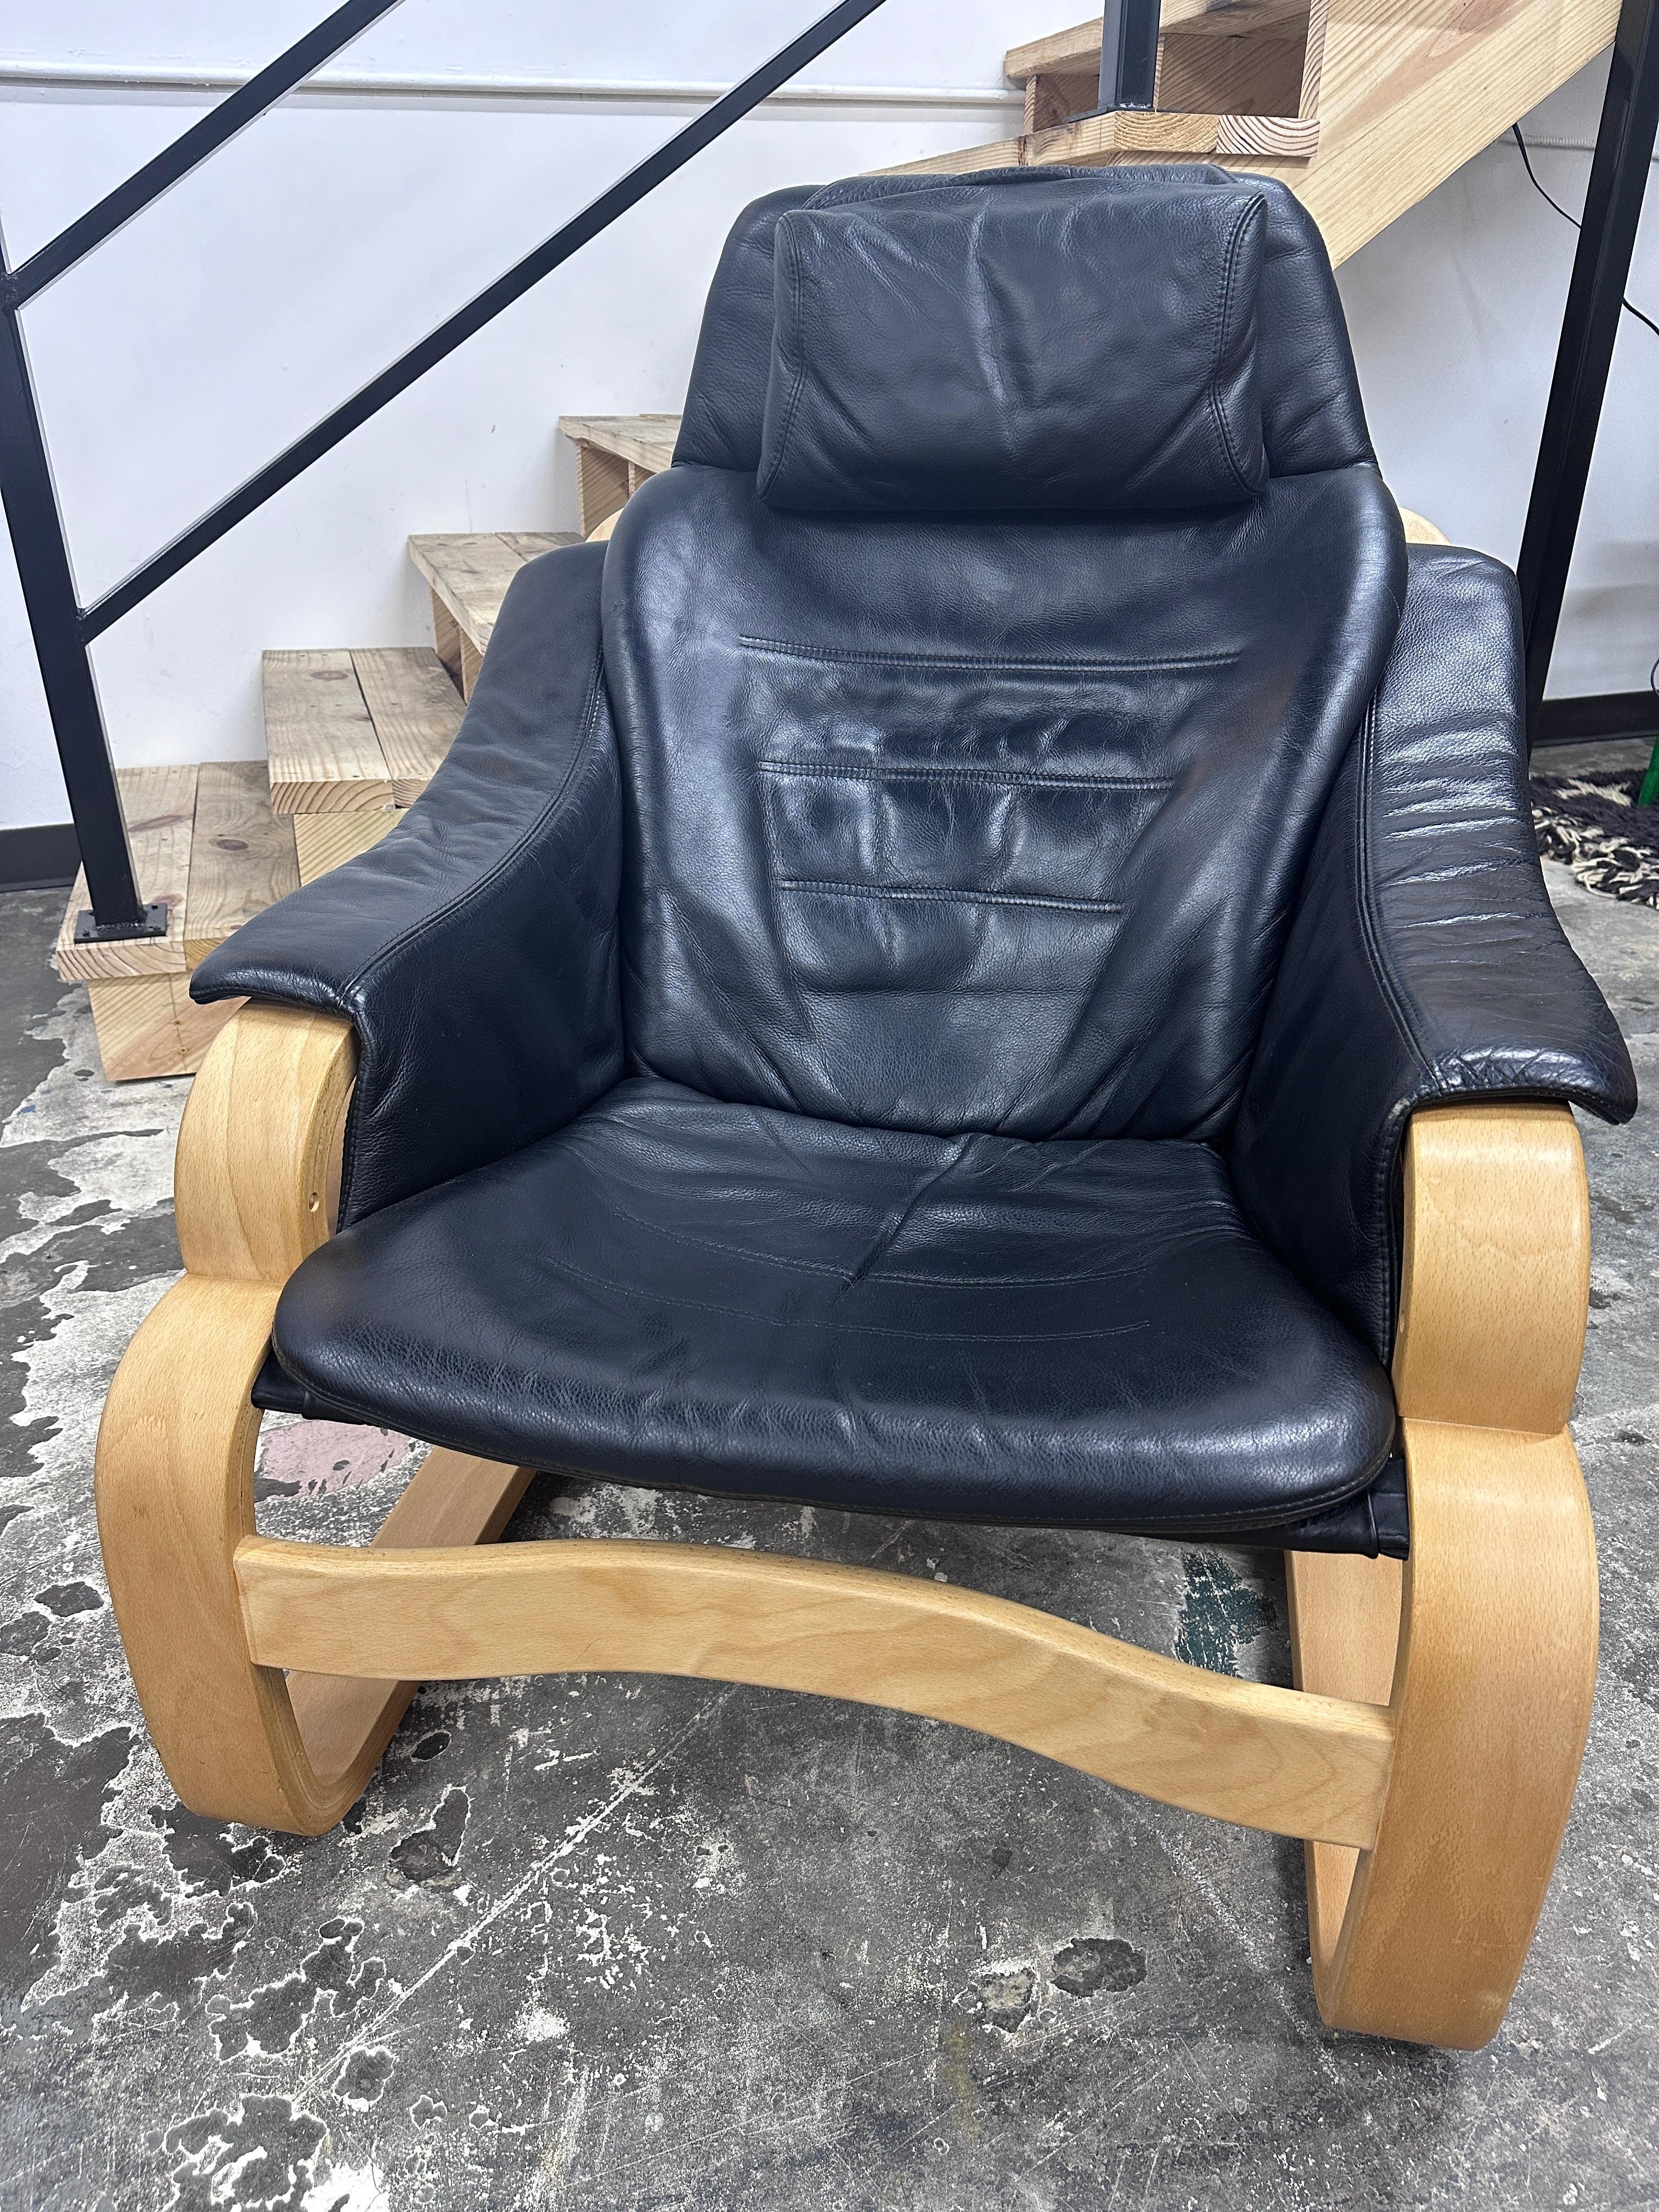 This 'Apollo' easy chair is comprised of a bent plywood frame and black leather upholstery. Produced by Skippers Furniture in Denmark during the 1970s and is labeled. In excellent vintage condition with minor age-consistent wear.

Two chairs